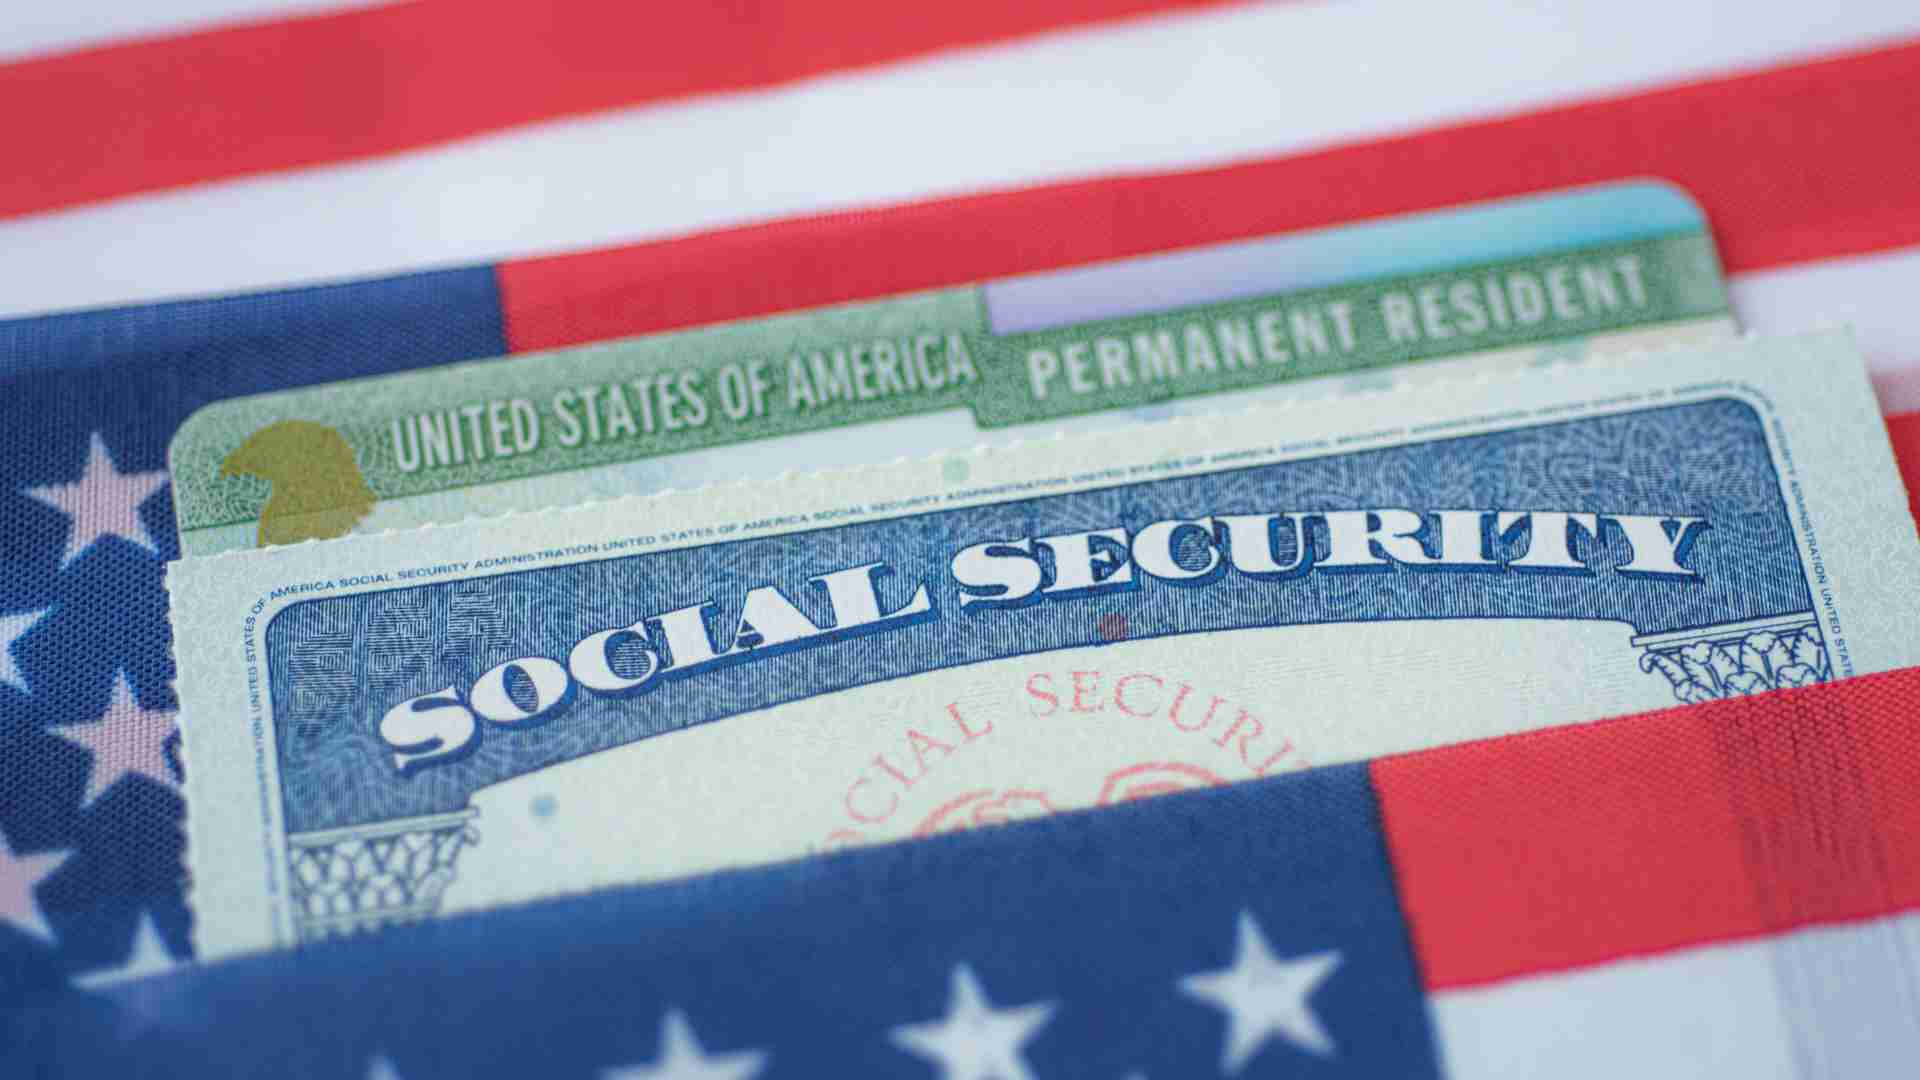 Retirement benefits are coming in just 2 days, check if Social Security will send you some money in the USA